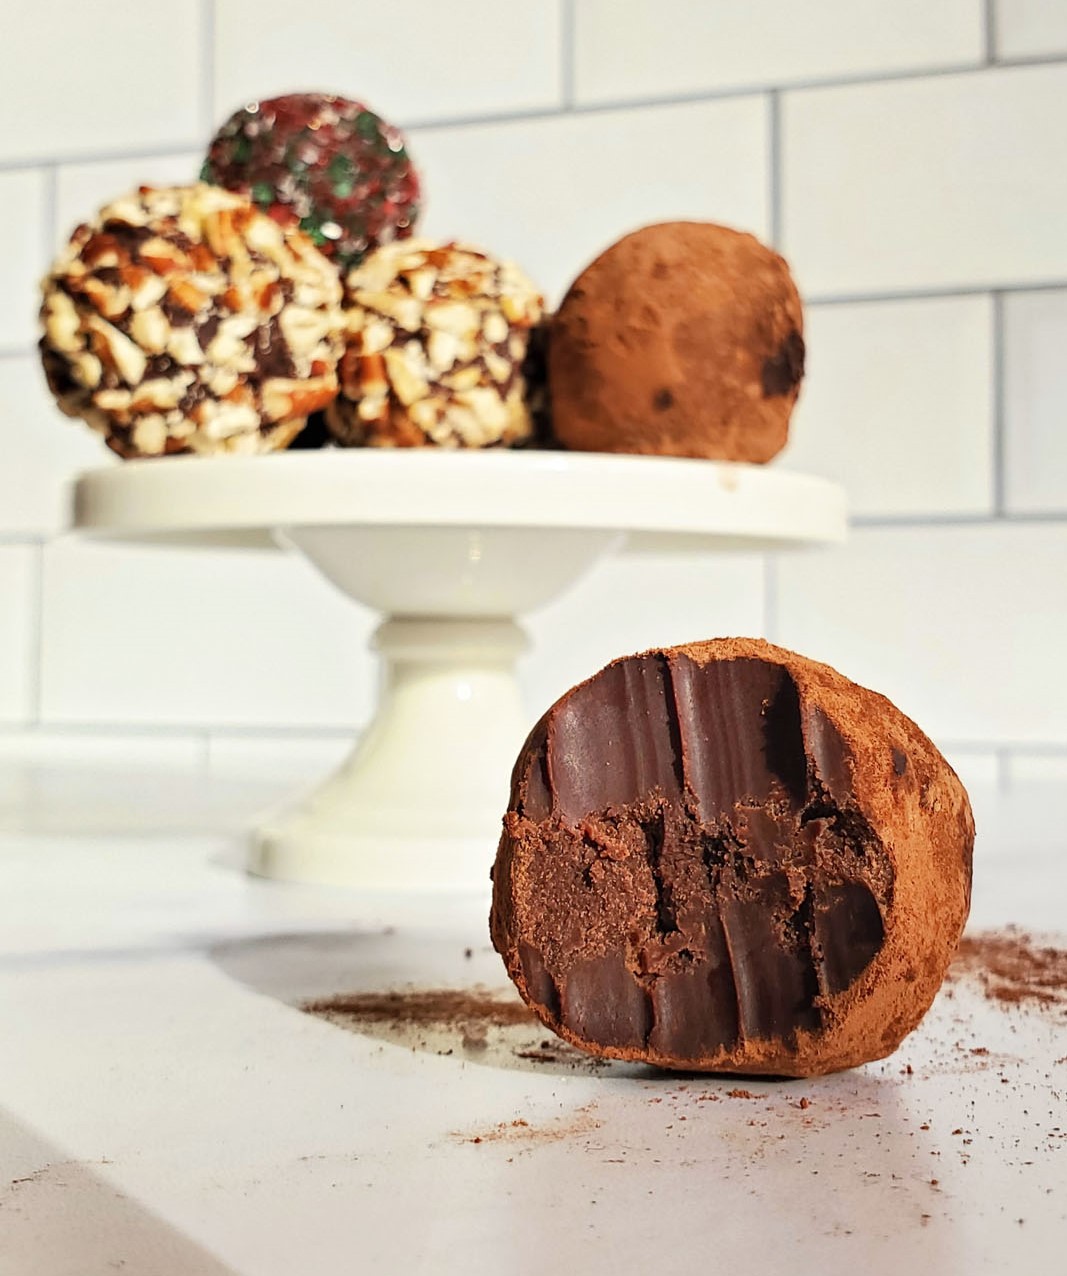 A truffle covered in cocoa powder, with a bite out of it sits in the foreground. In the background, on a cake pedestal sits five more truffles covered in various toppings including, chopped pecans, holiday red/green sprinkles and another truffle covered in cocoa powder. Behind the truffles is a subway tile wall.